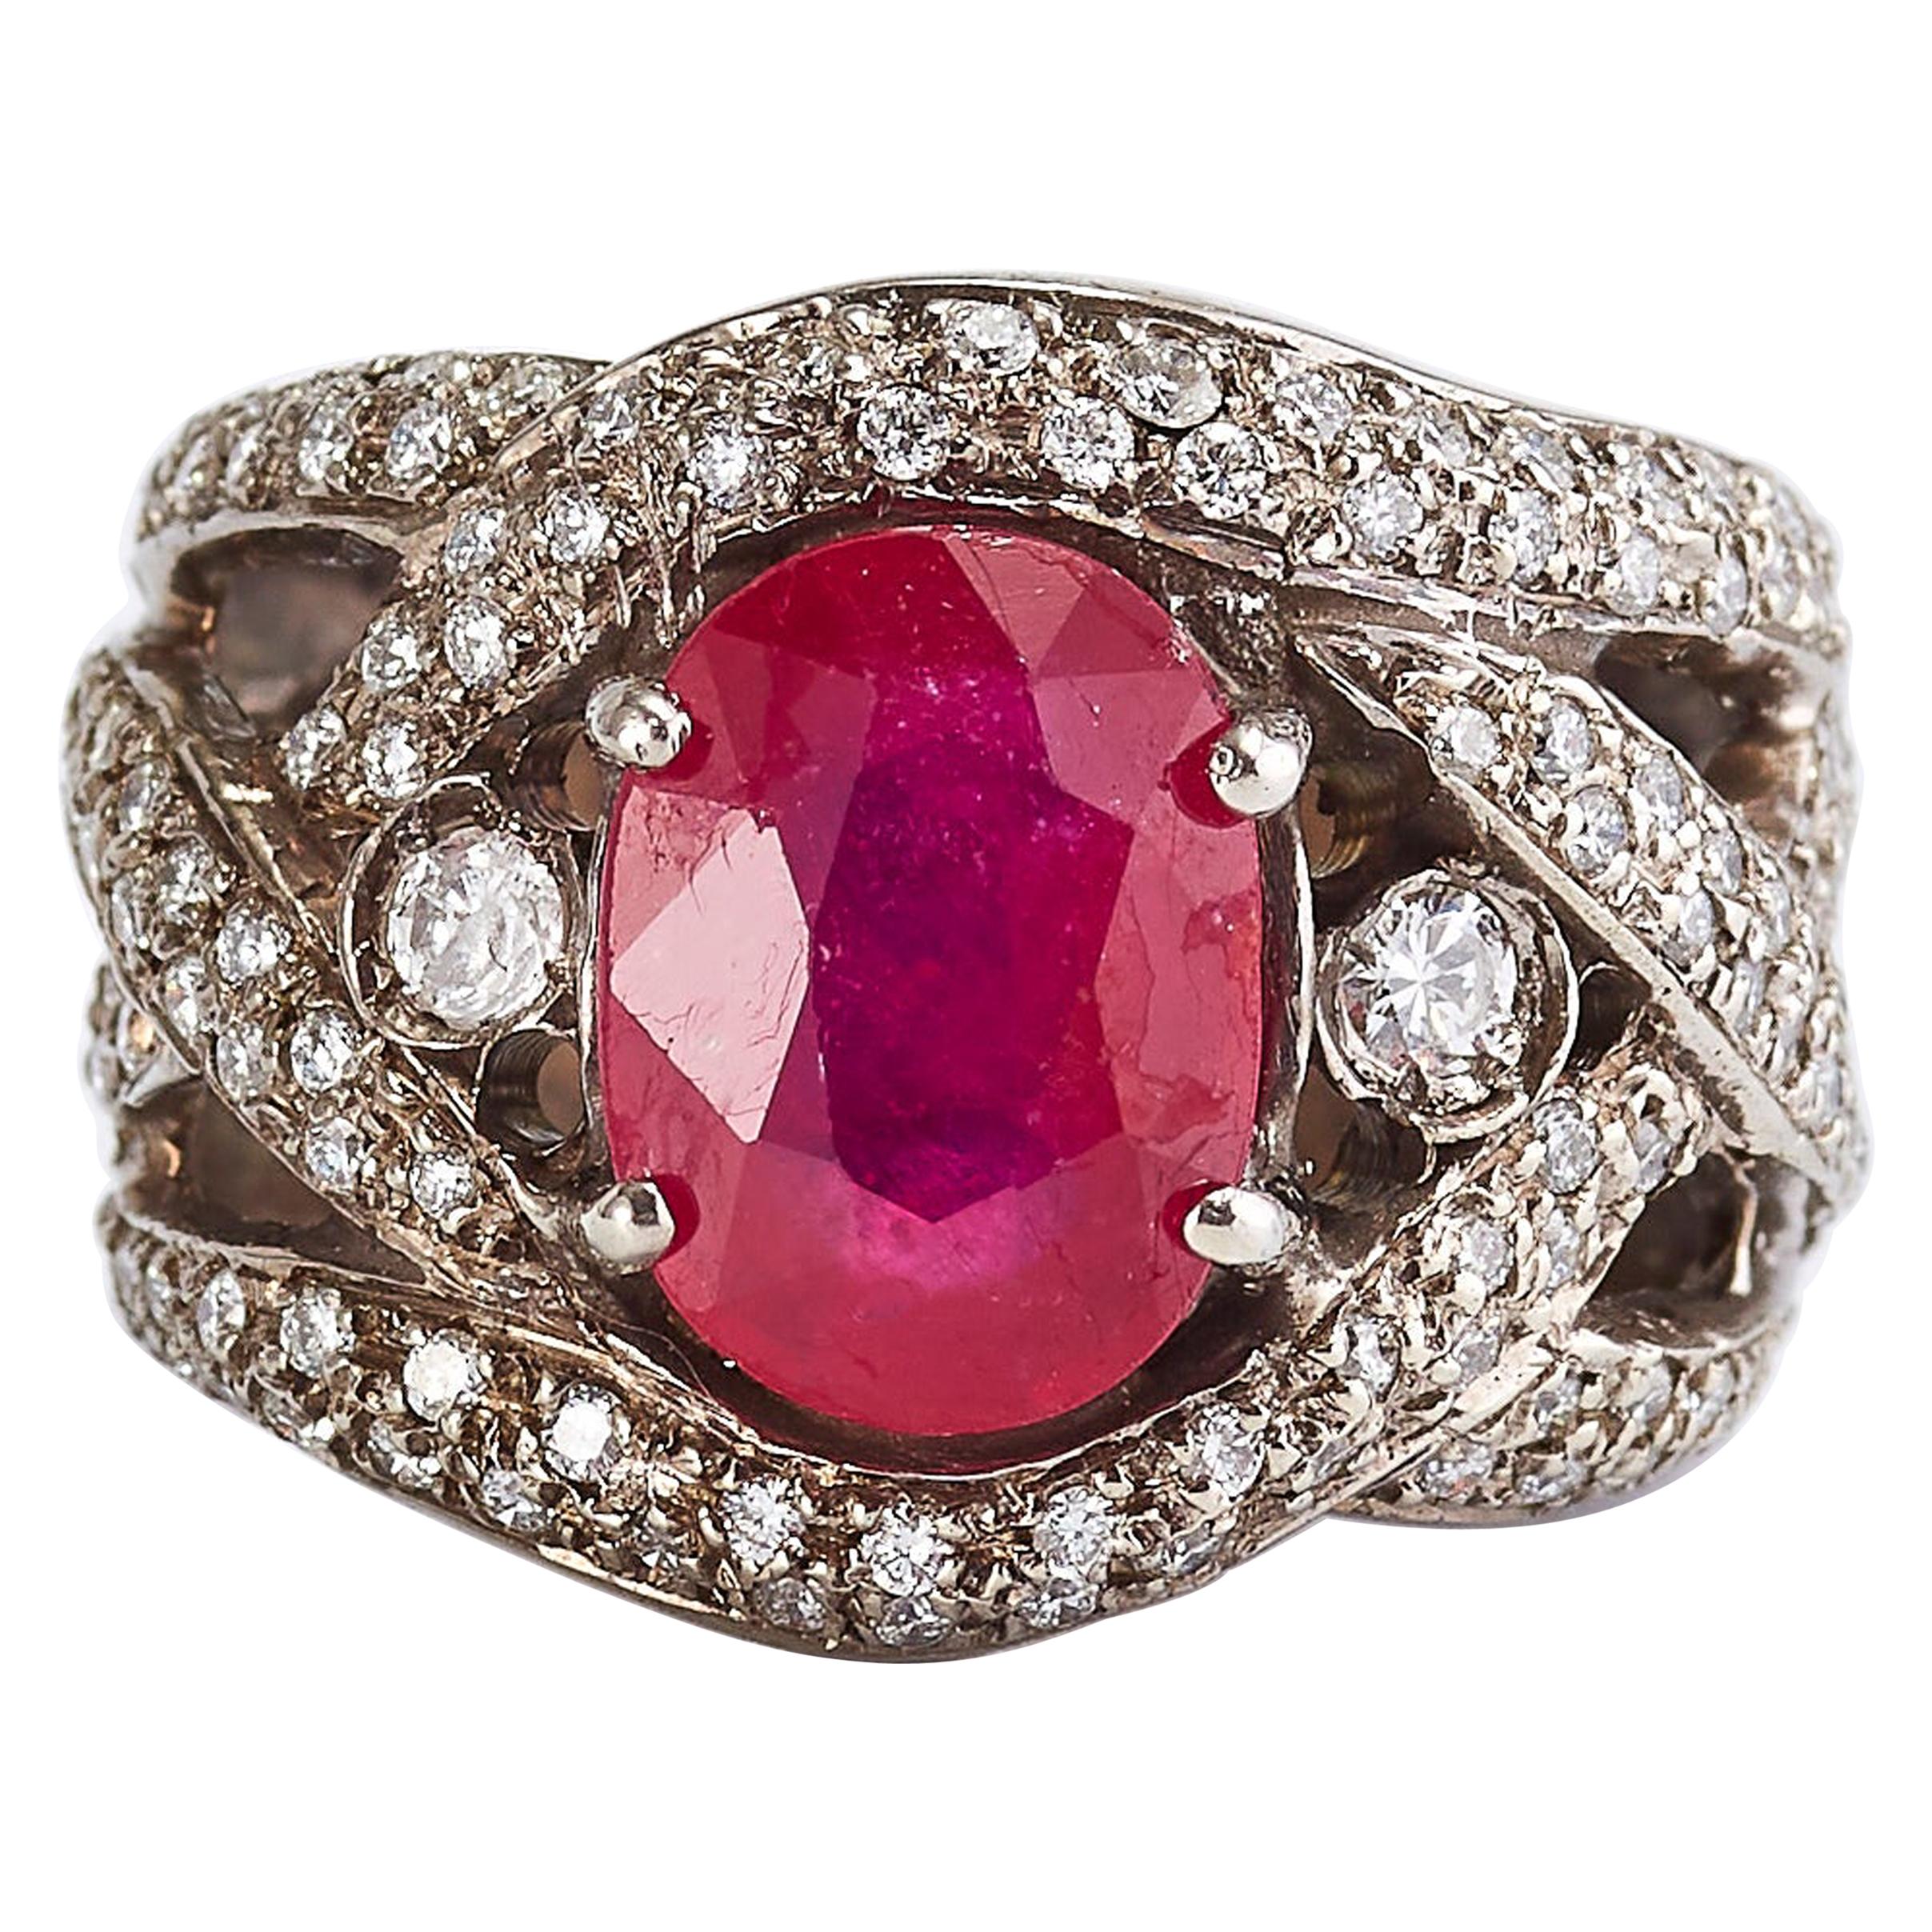 14 Karat White Gold Ring with Center Stone Ruby and Diamonds